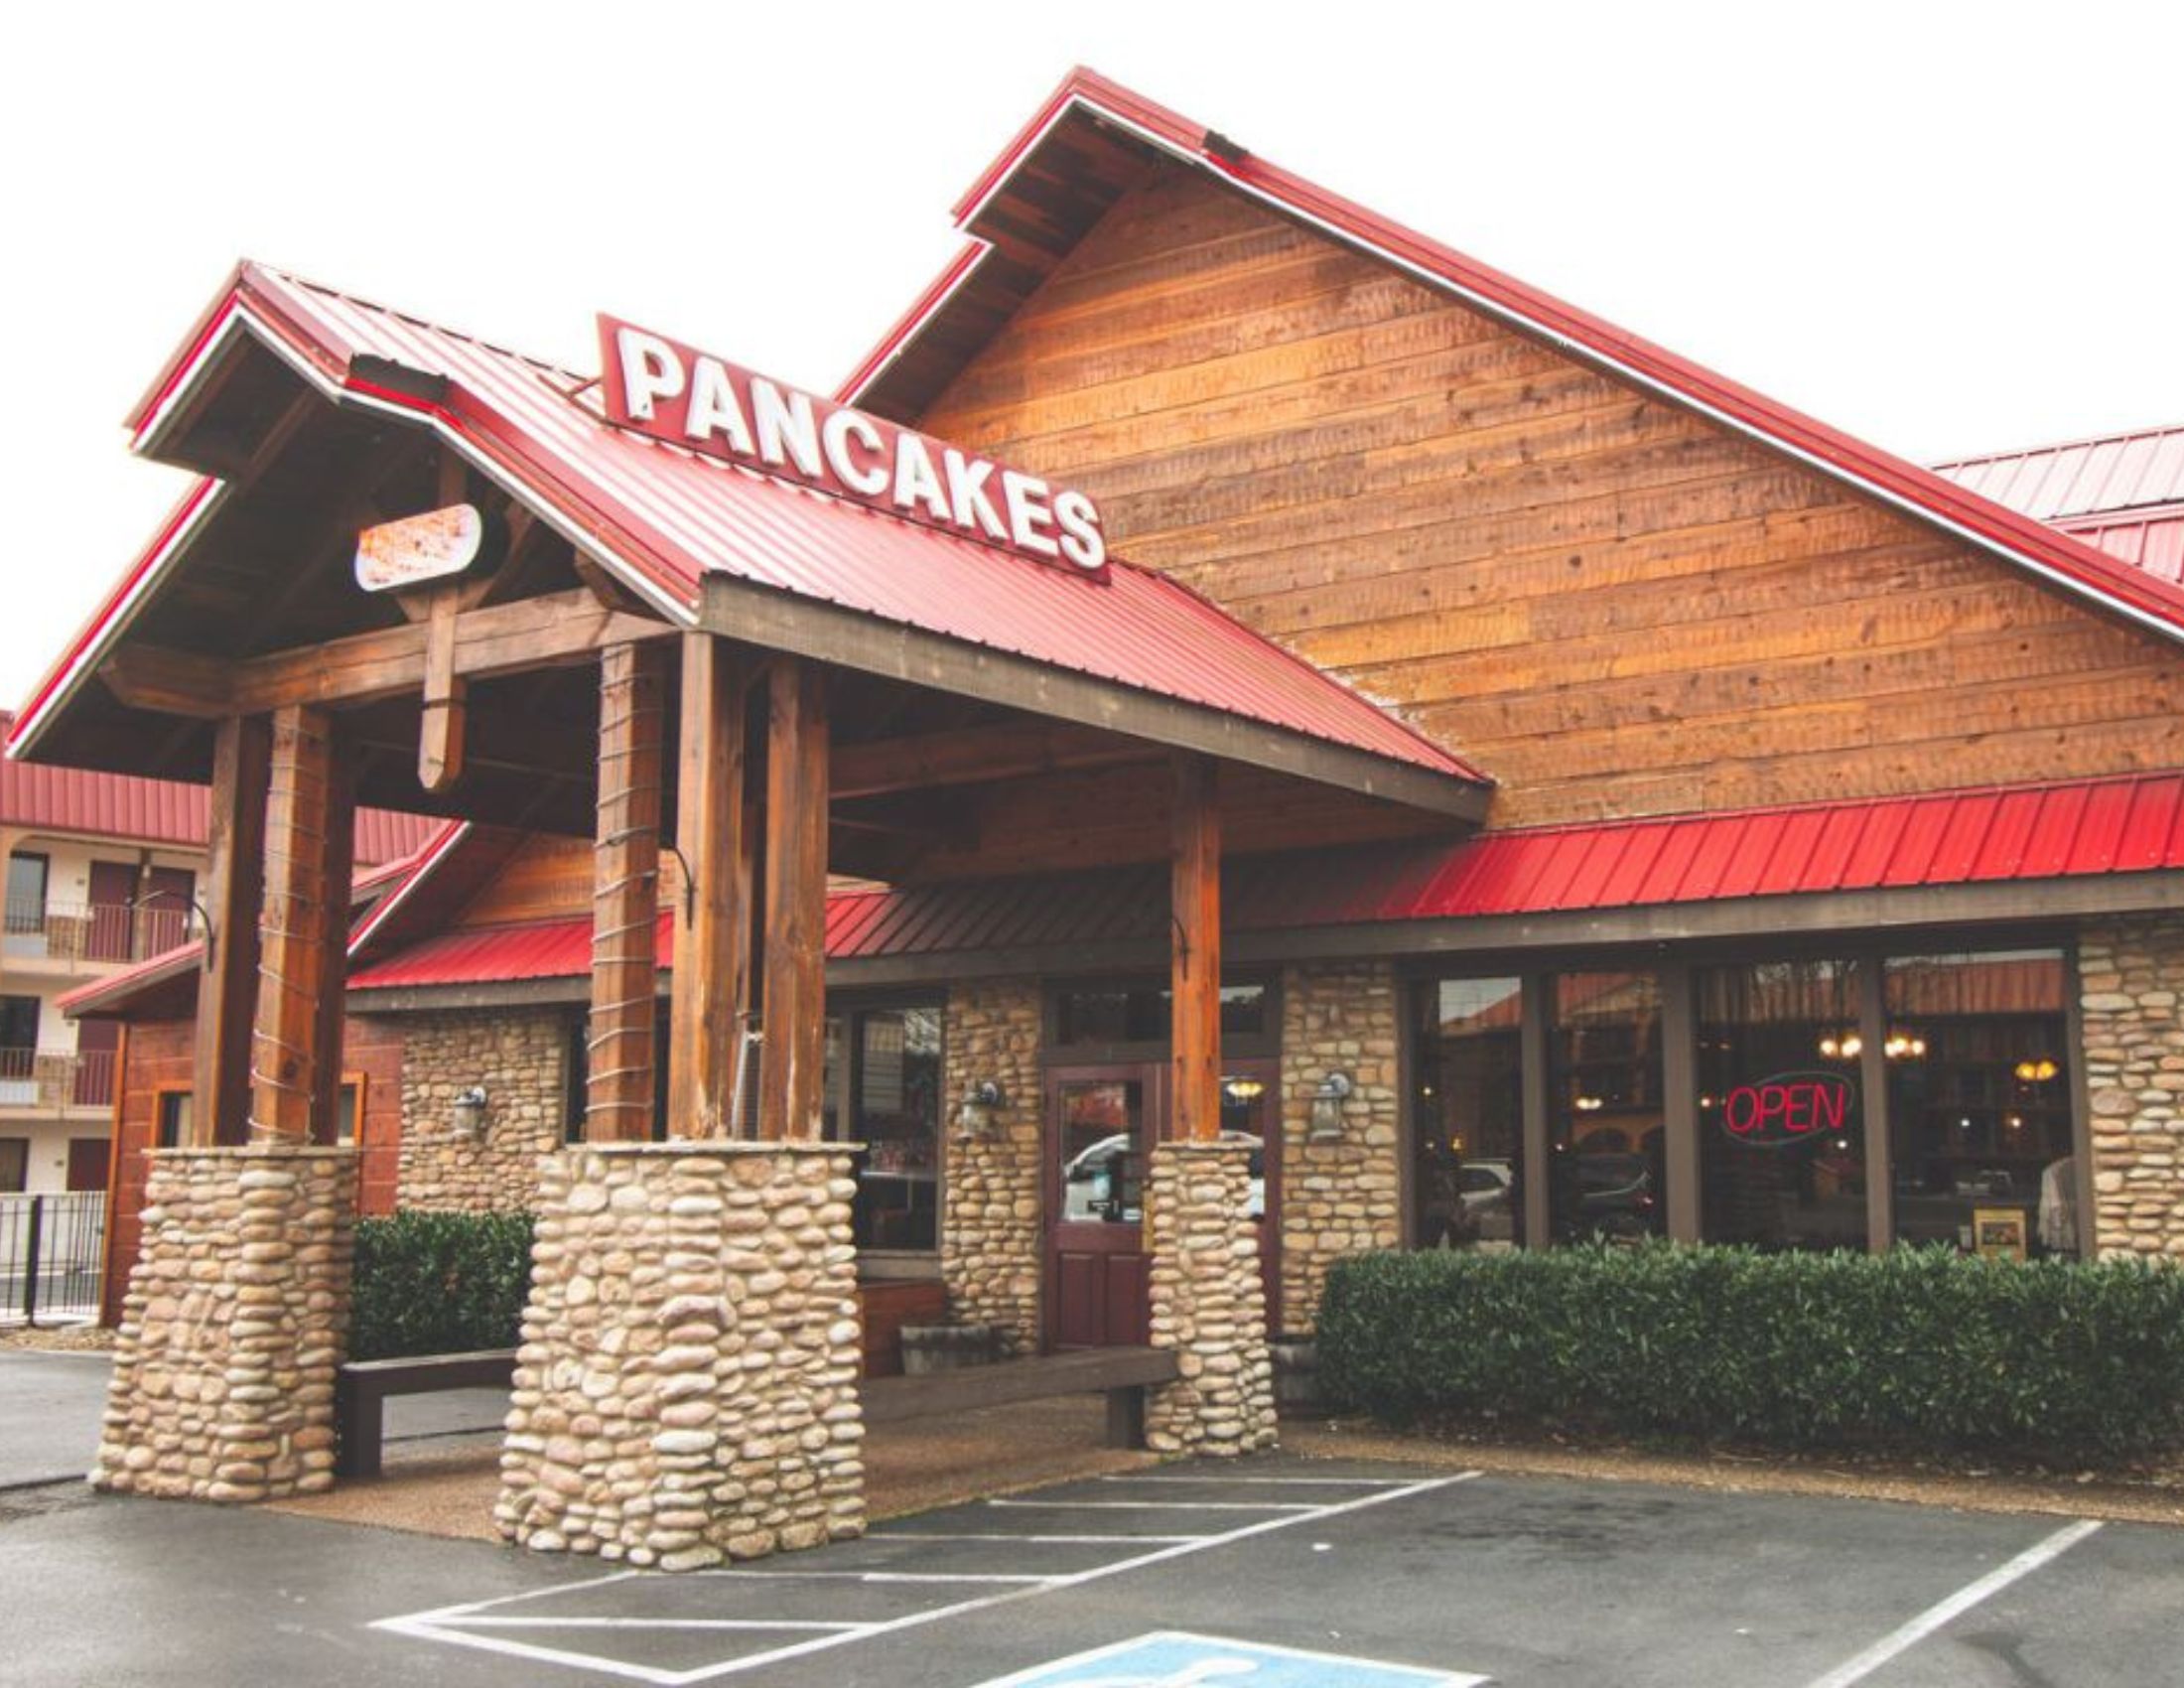 Reagan's House of Pancakes in Pigeon Forge